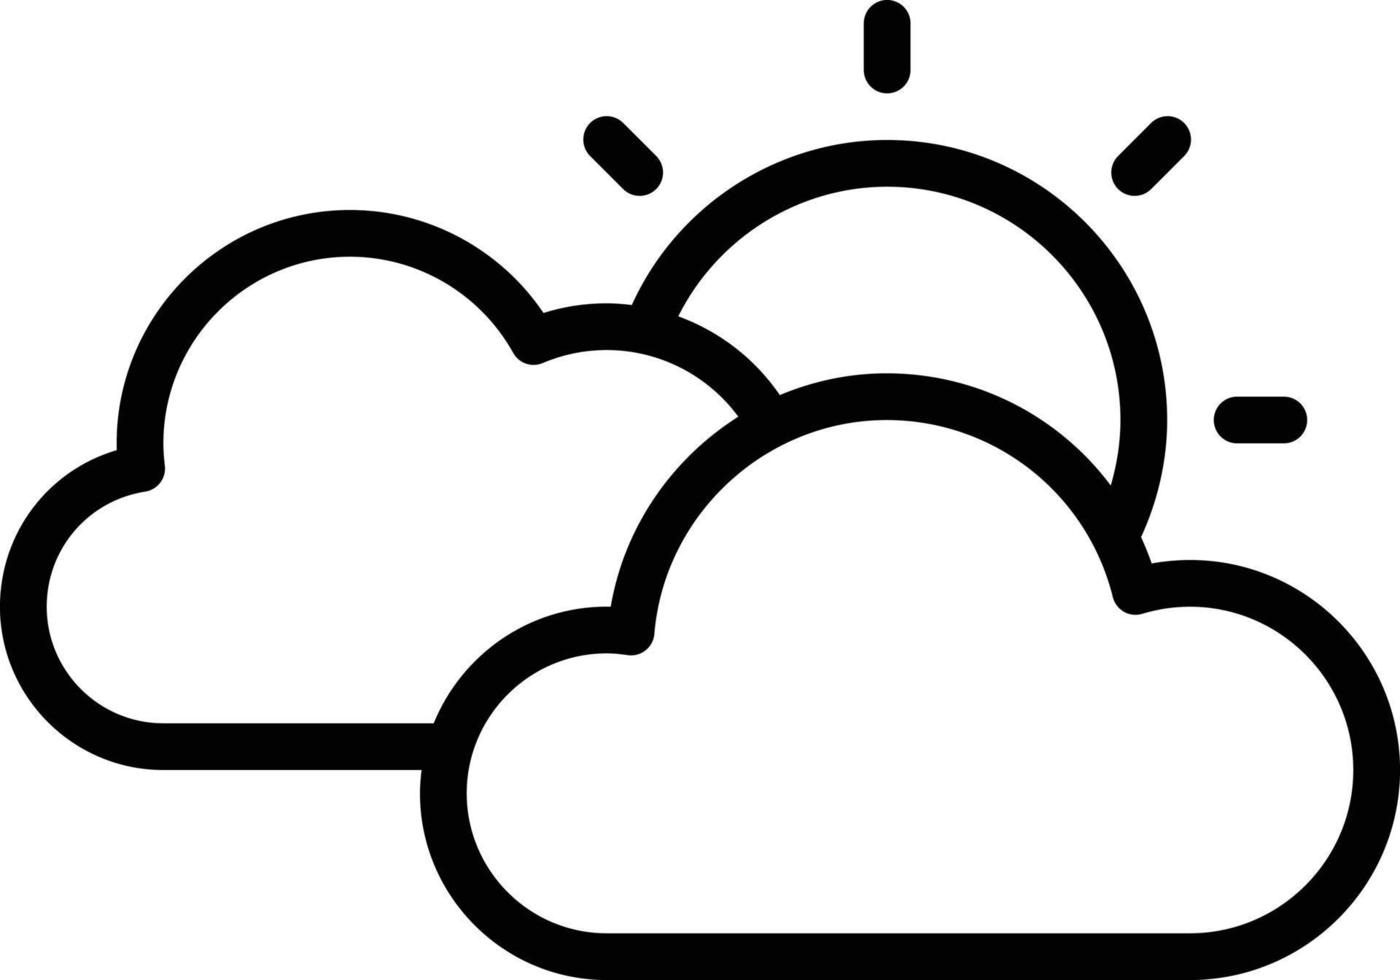 partly cloudy mostly sky cloud - outline icon vector